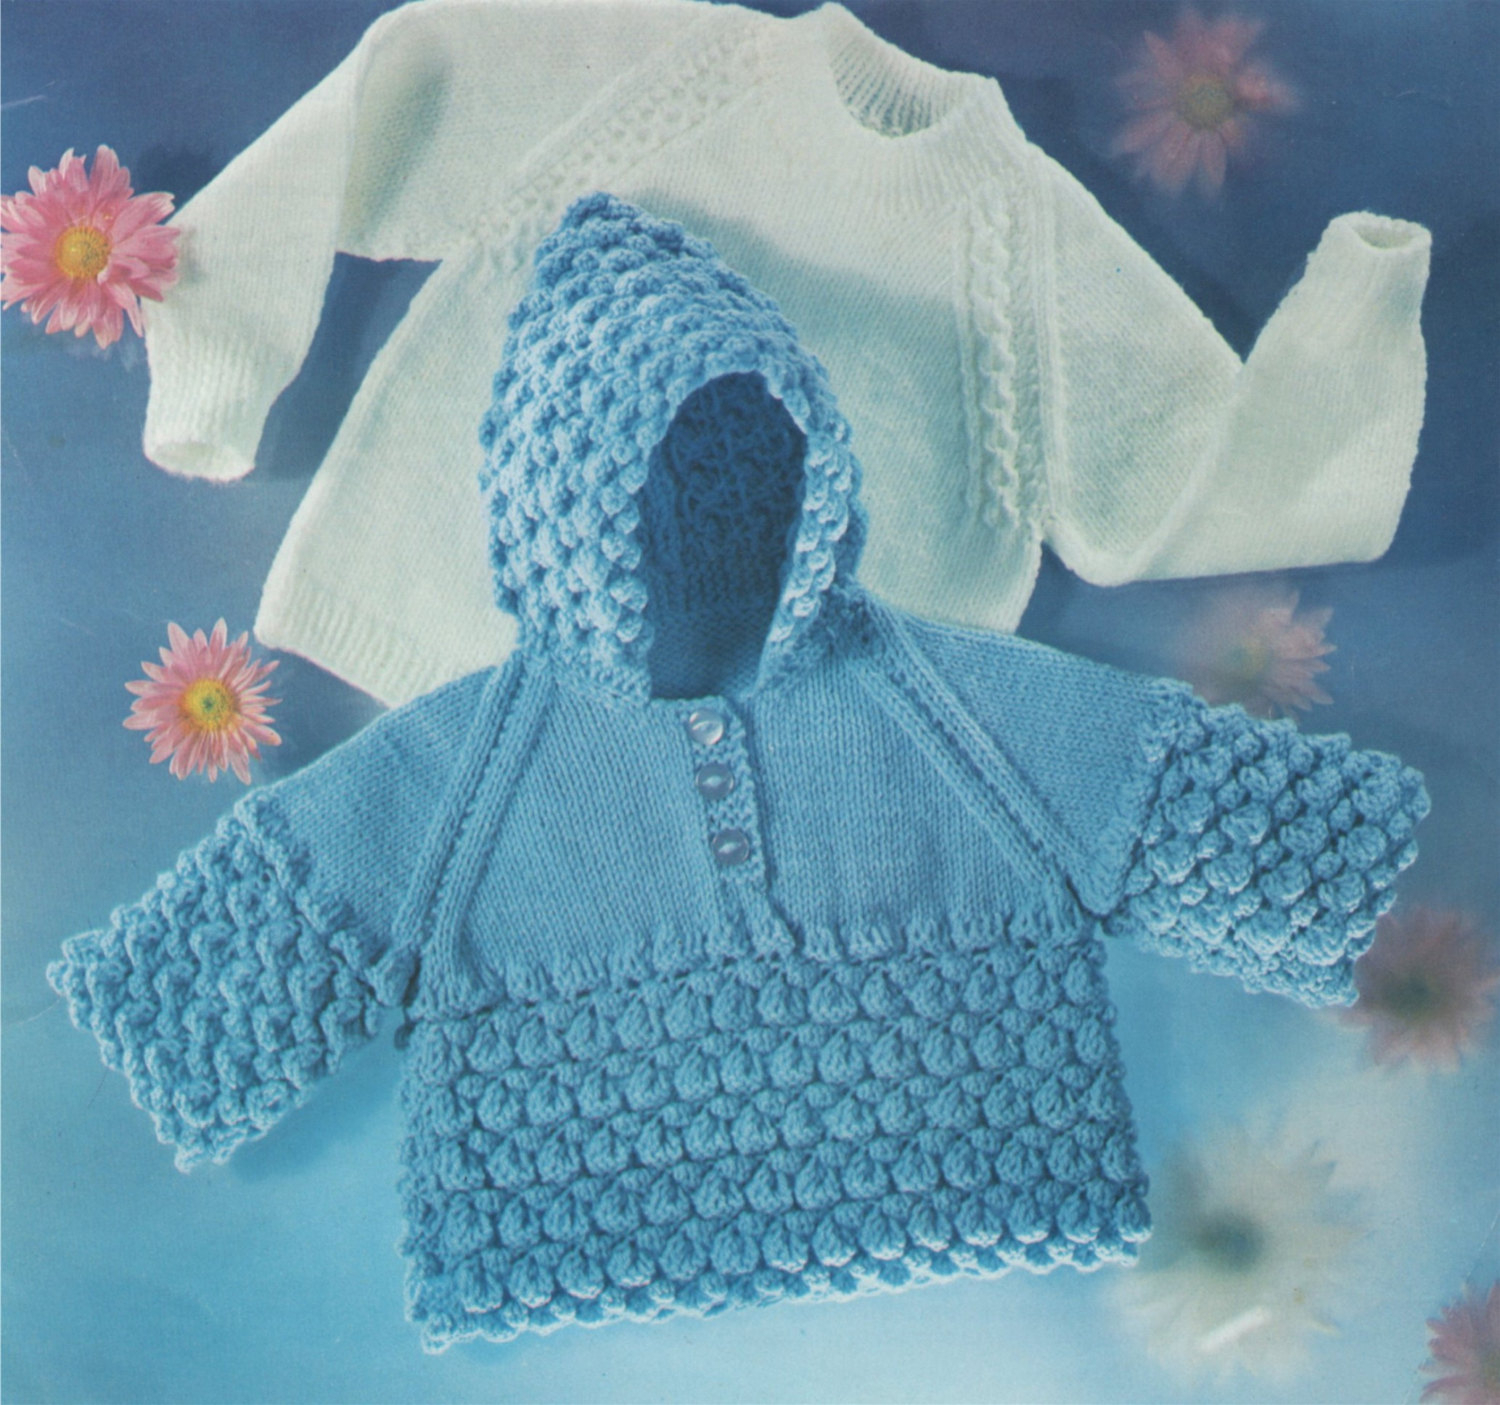 Hooded Jumper Knitting Pattern Babies Jumper And Hooded Sweater Knitting Pattern Pdf Boys Or Girls Hoodie Sweater 19 20 Inches White Jumper 18 20 And 22 Inch Chest